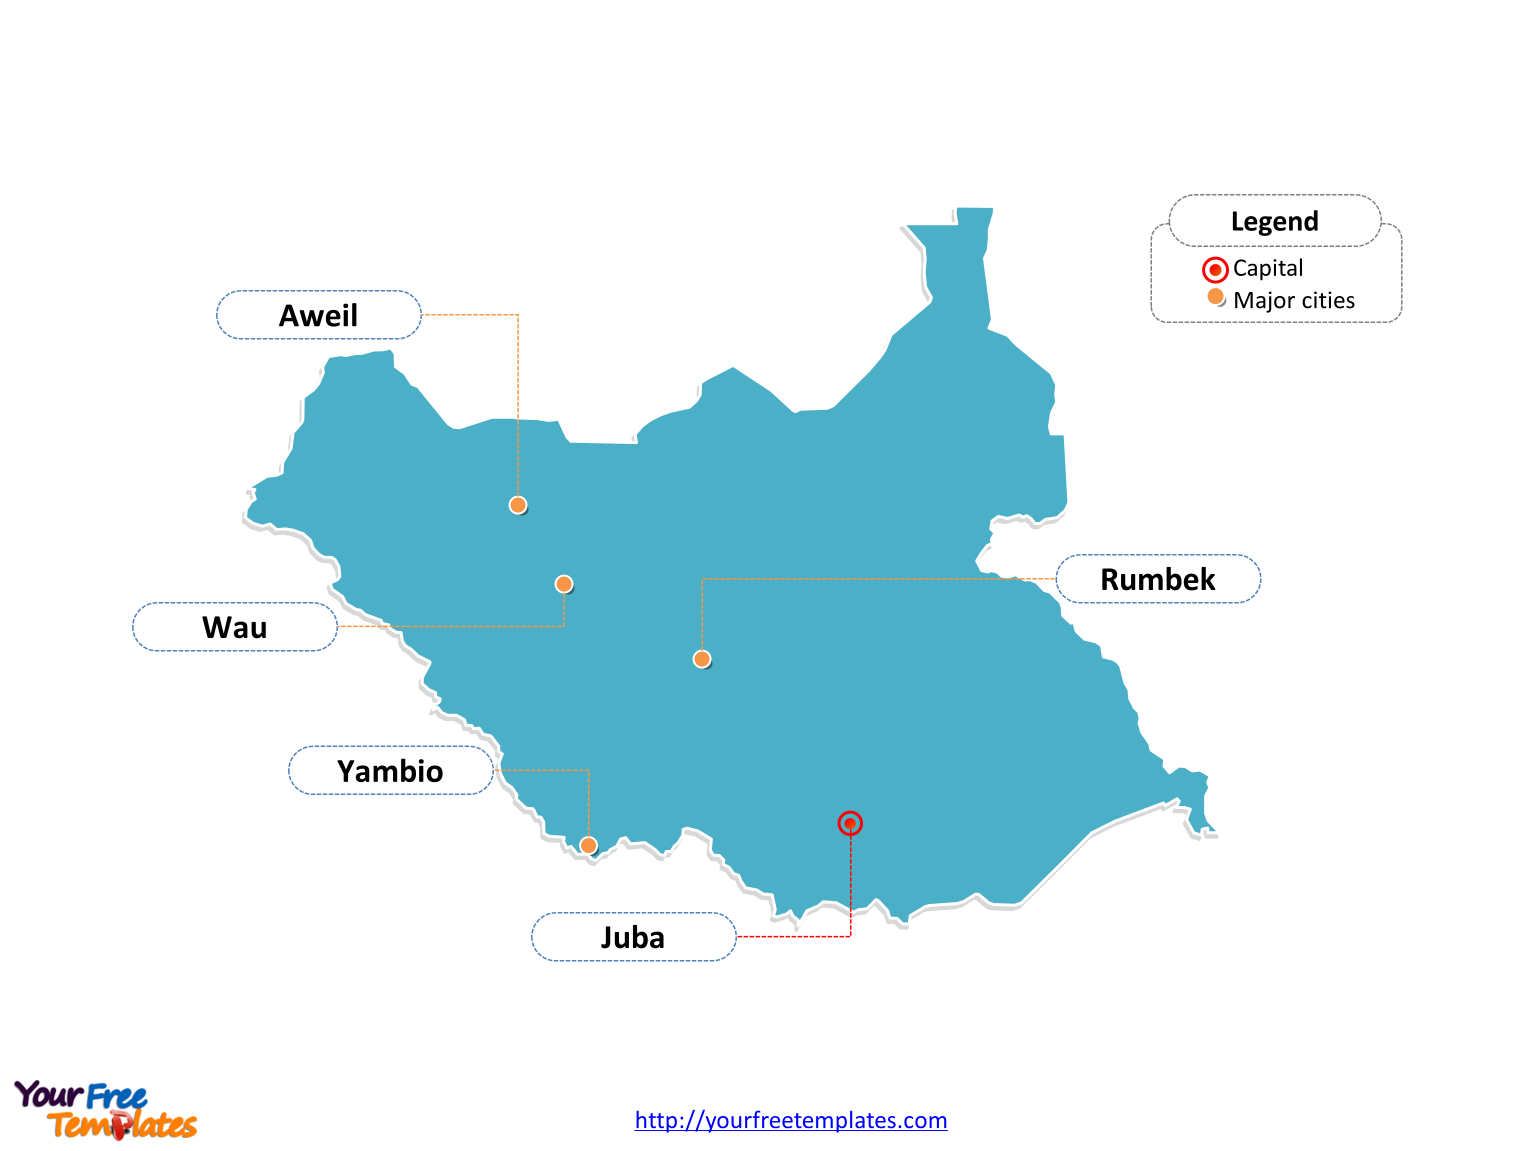 South Sudan Outline map labeled with cities